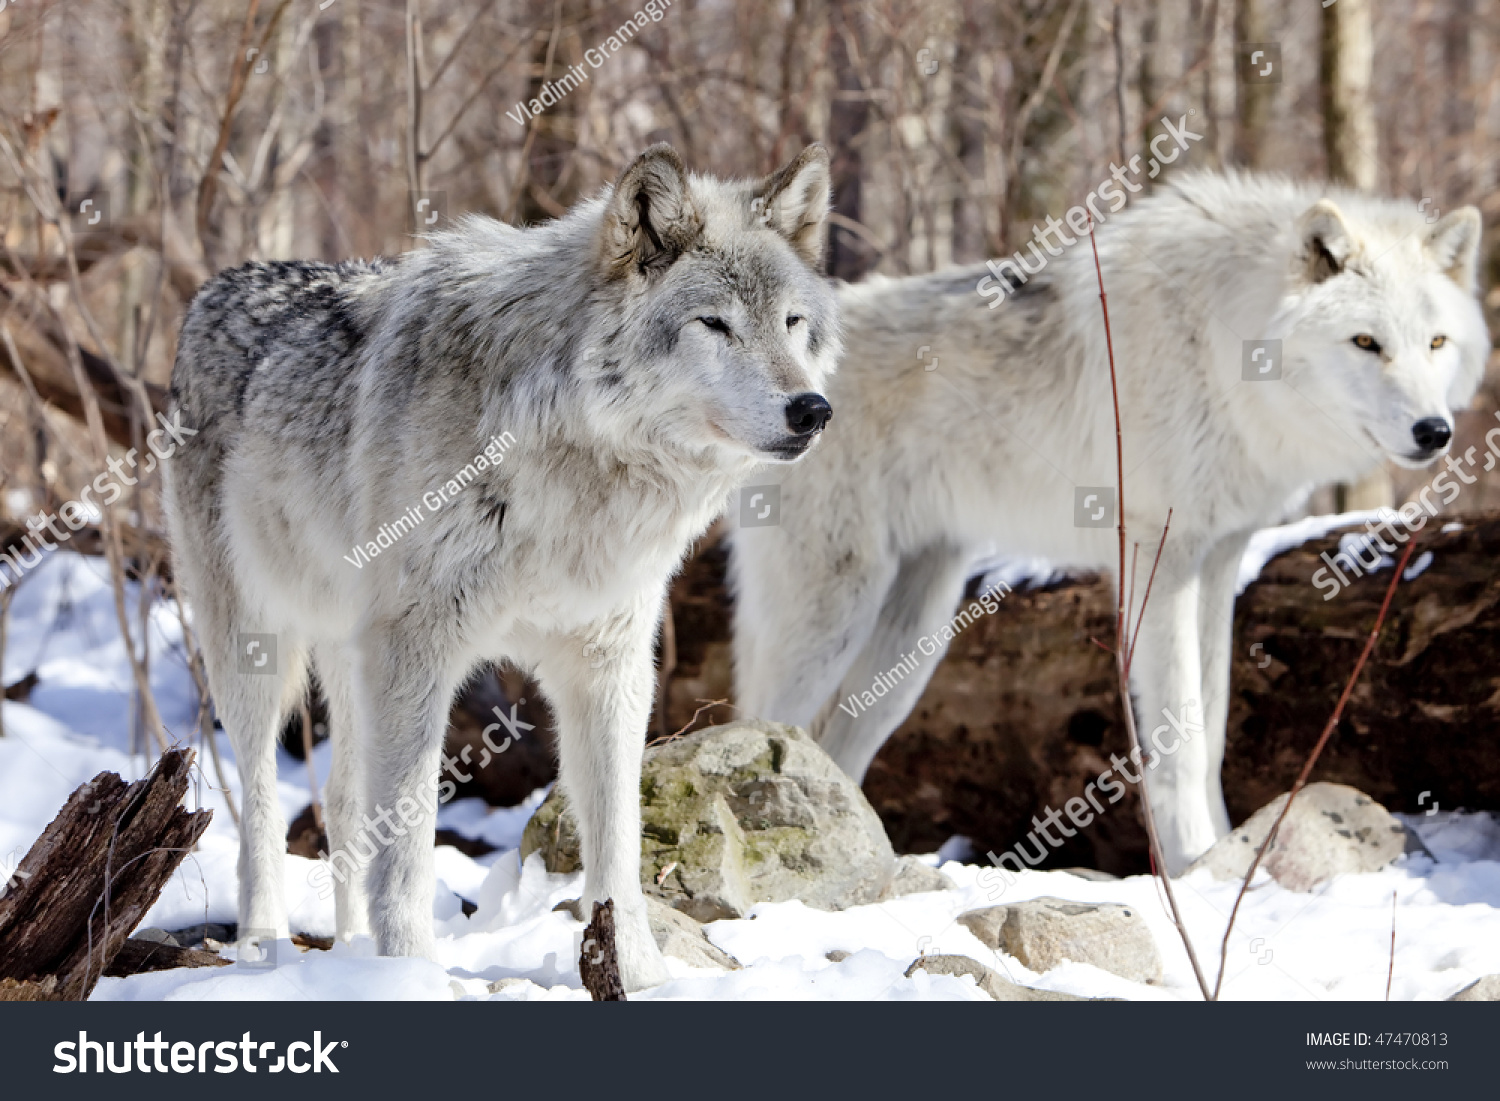 Wolves On Watch Stock Photo 47470813 : Shutterstock